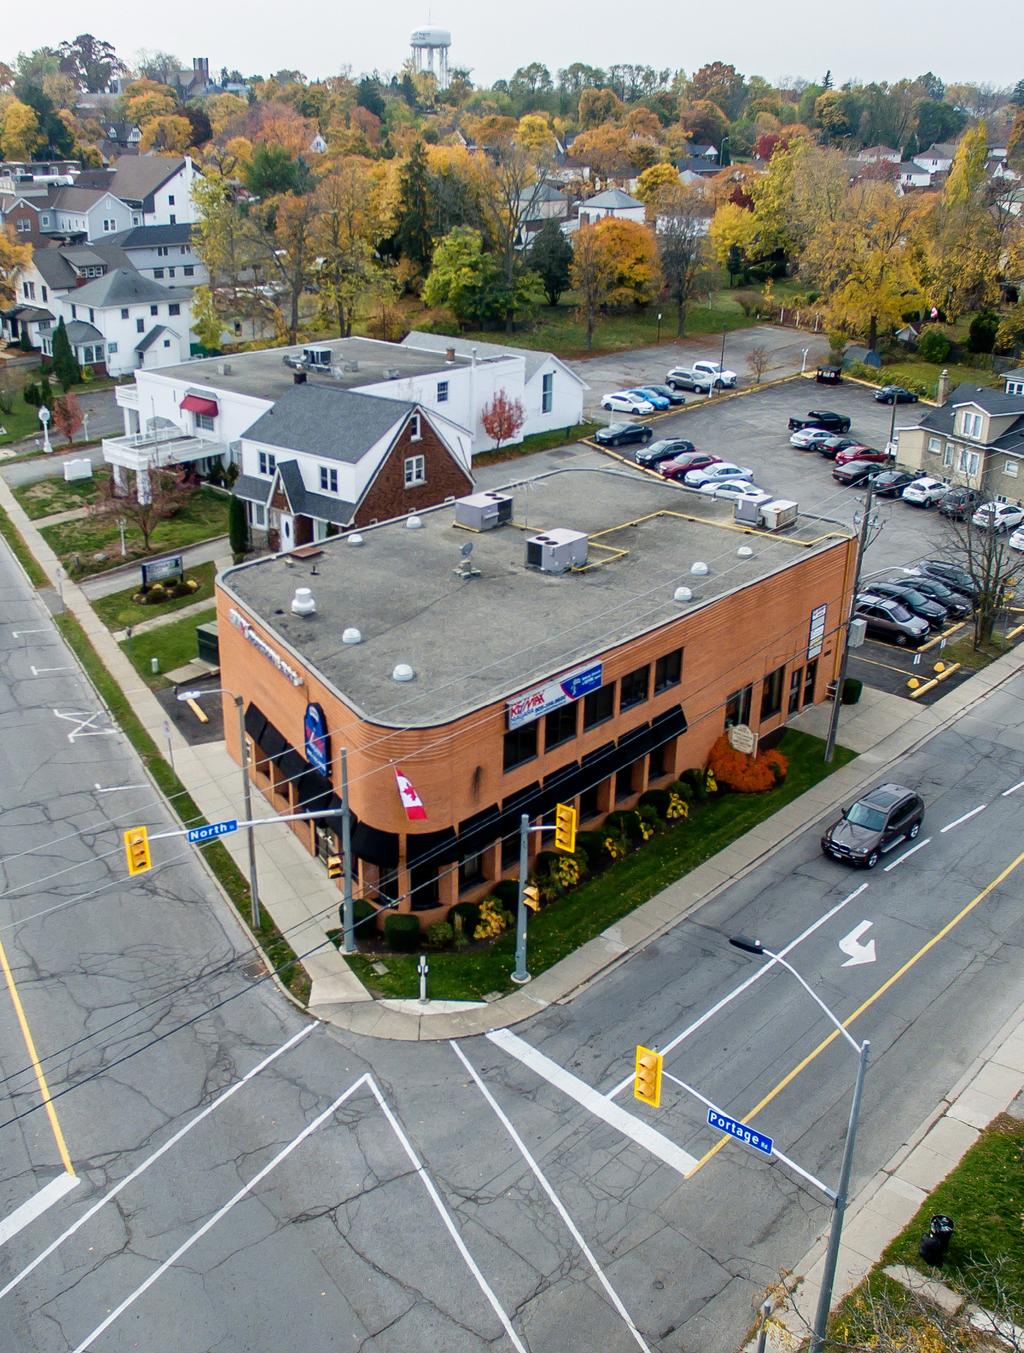 Welcome to RE/MAX Niagara Commercial RE/MAX Niagara Commercial we provide creative real estate solutions for Commercial/Industrial Sales and Leasing in the Niagara Region, from acquisition